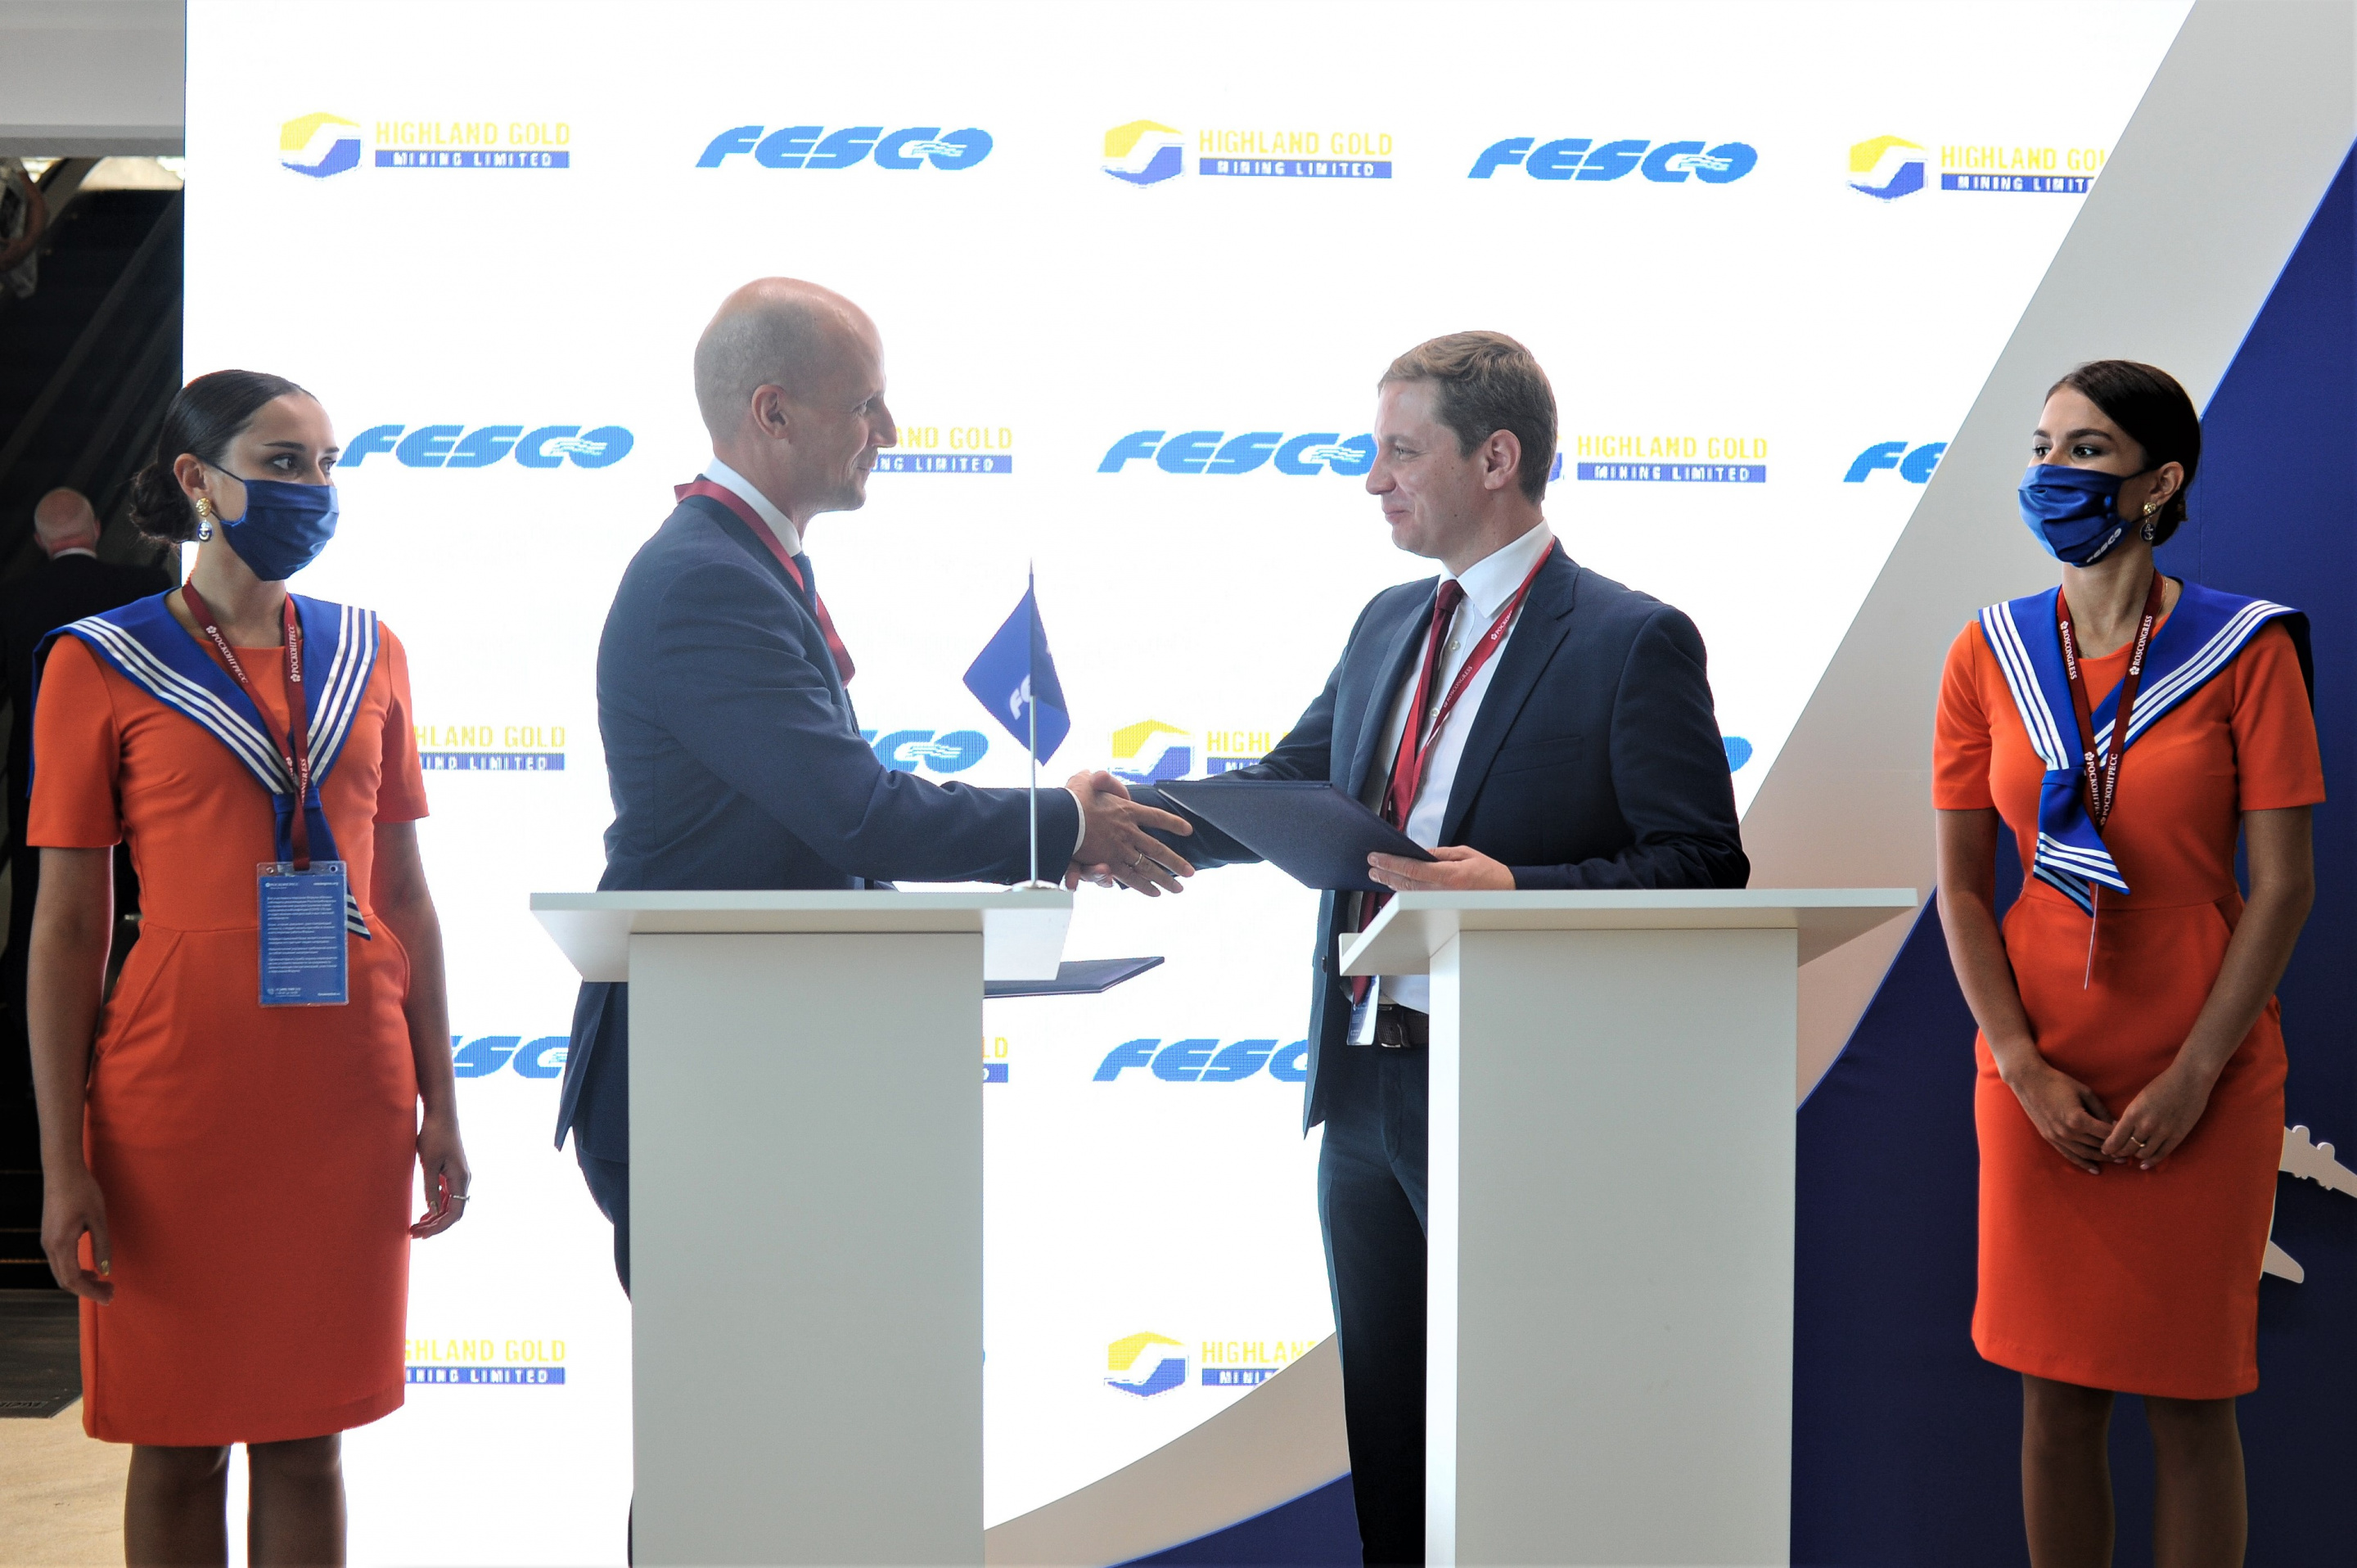 FESCO and Highland Gold agree to cooperate in the field of transport and logistics services